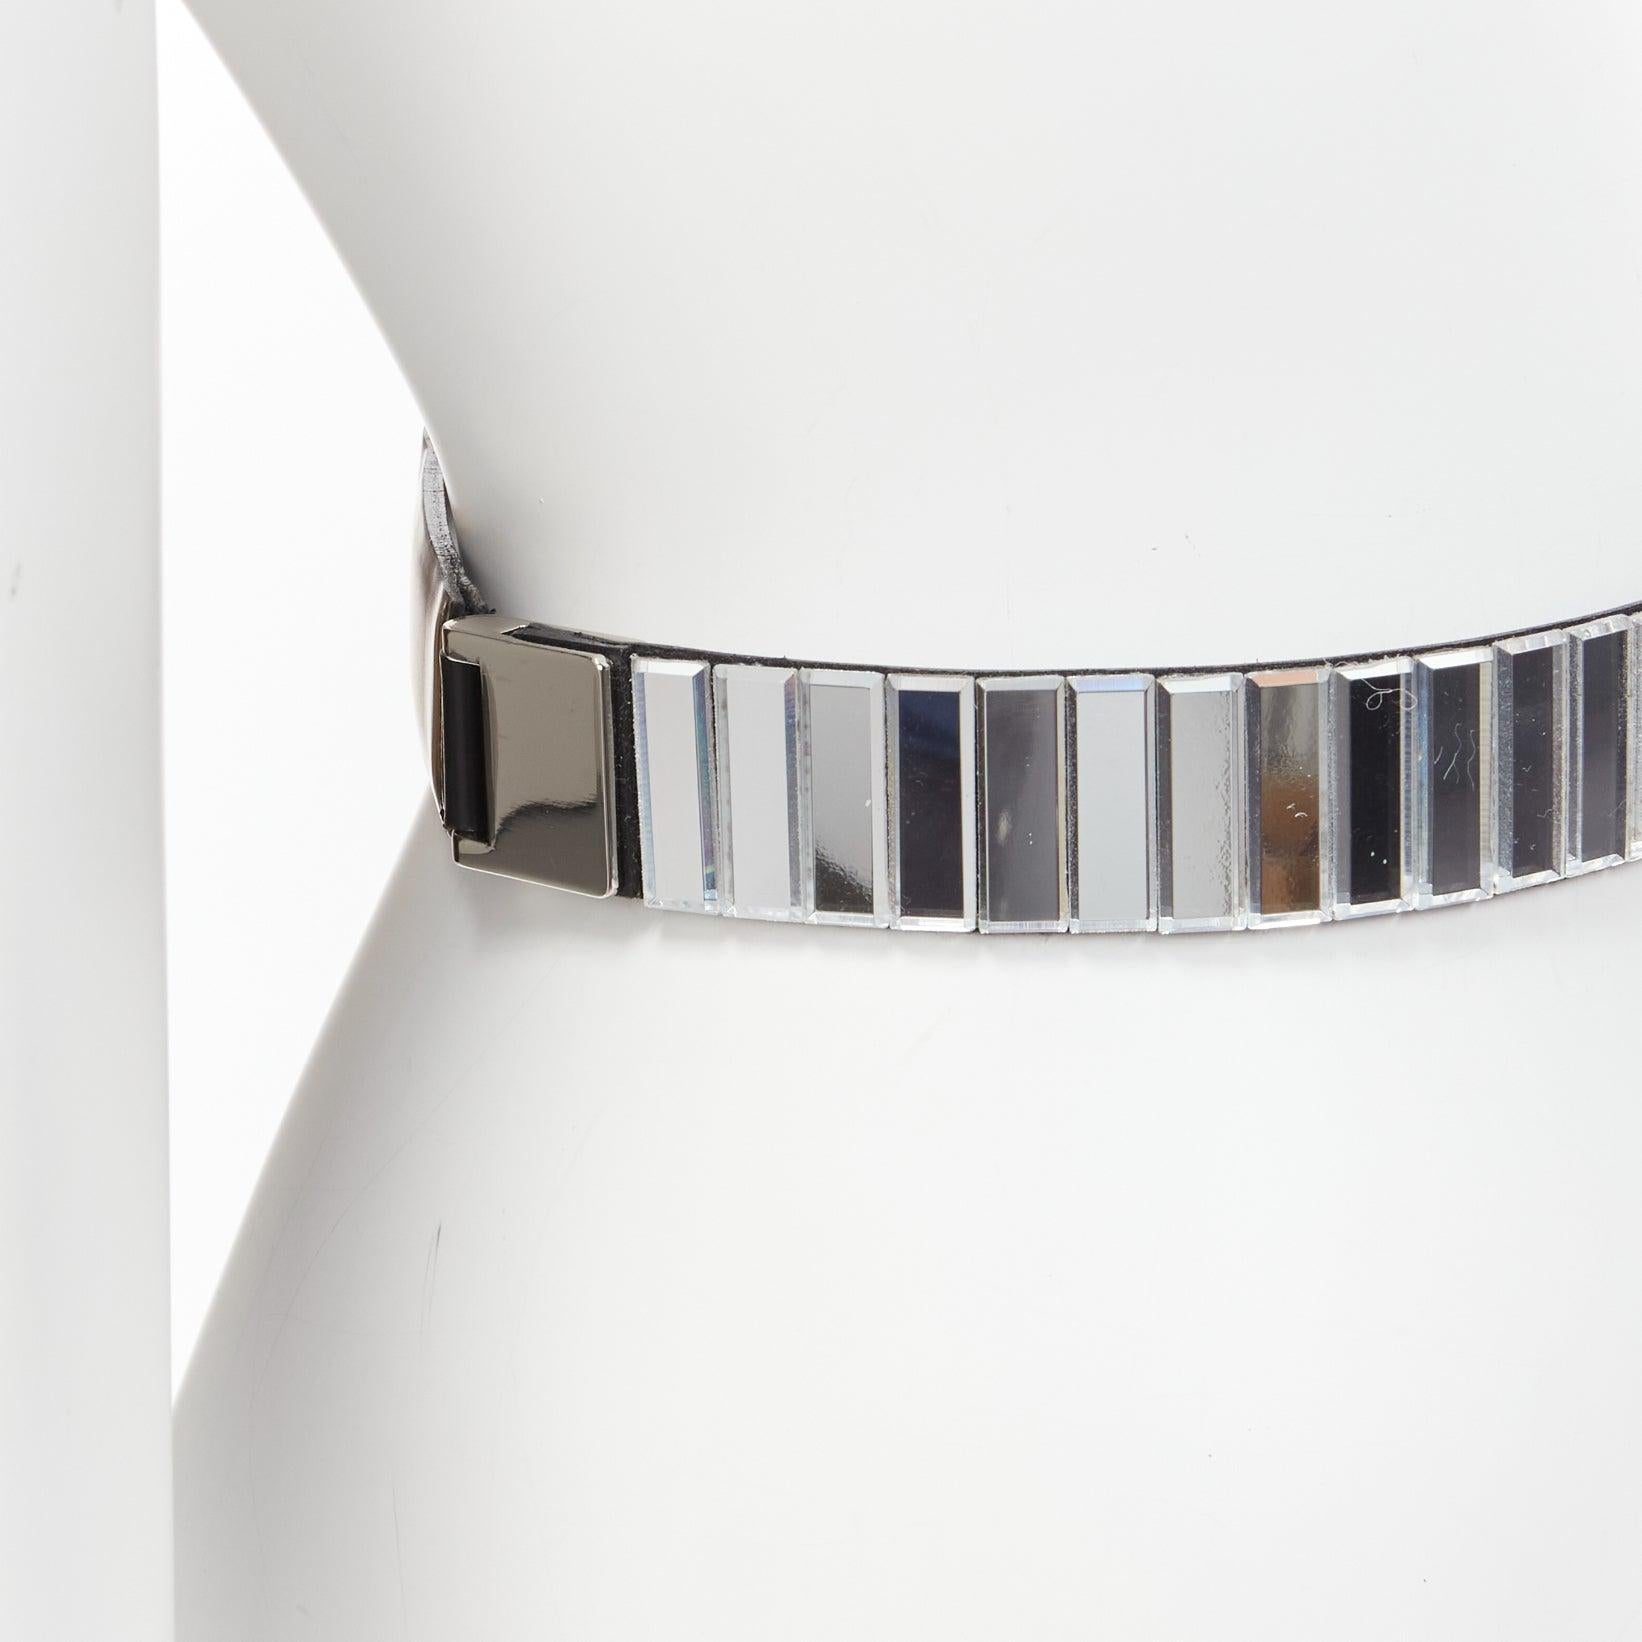 TOGA ARCHIVES silver mirrored acrylic tiles black leather elasticated belt
Reference: BSHW/A00064
Brand: Toga Archives
Material: Acrylic, Leather, Fabric
Color: Silver, Black
Pattern: Solid
Closure: Hook & Bar
Lining: Black